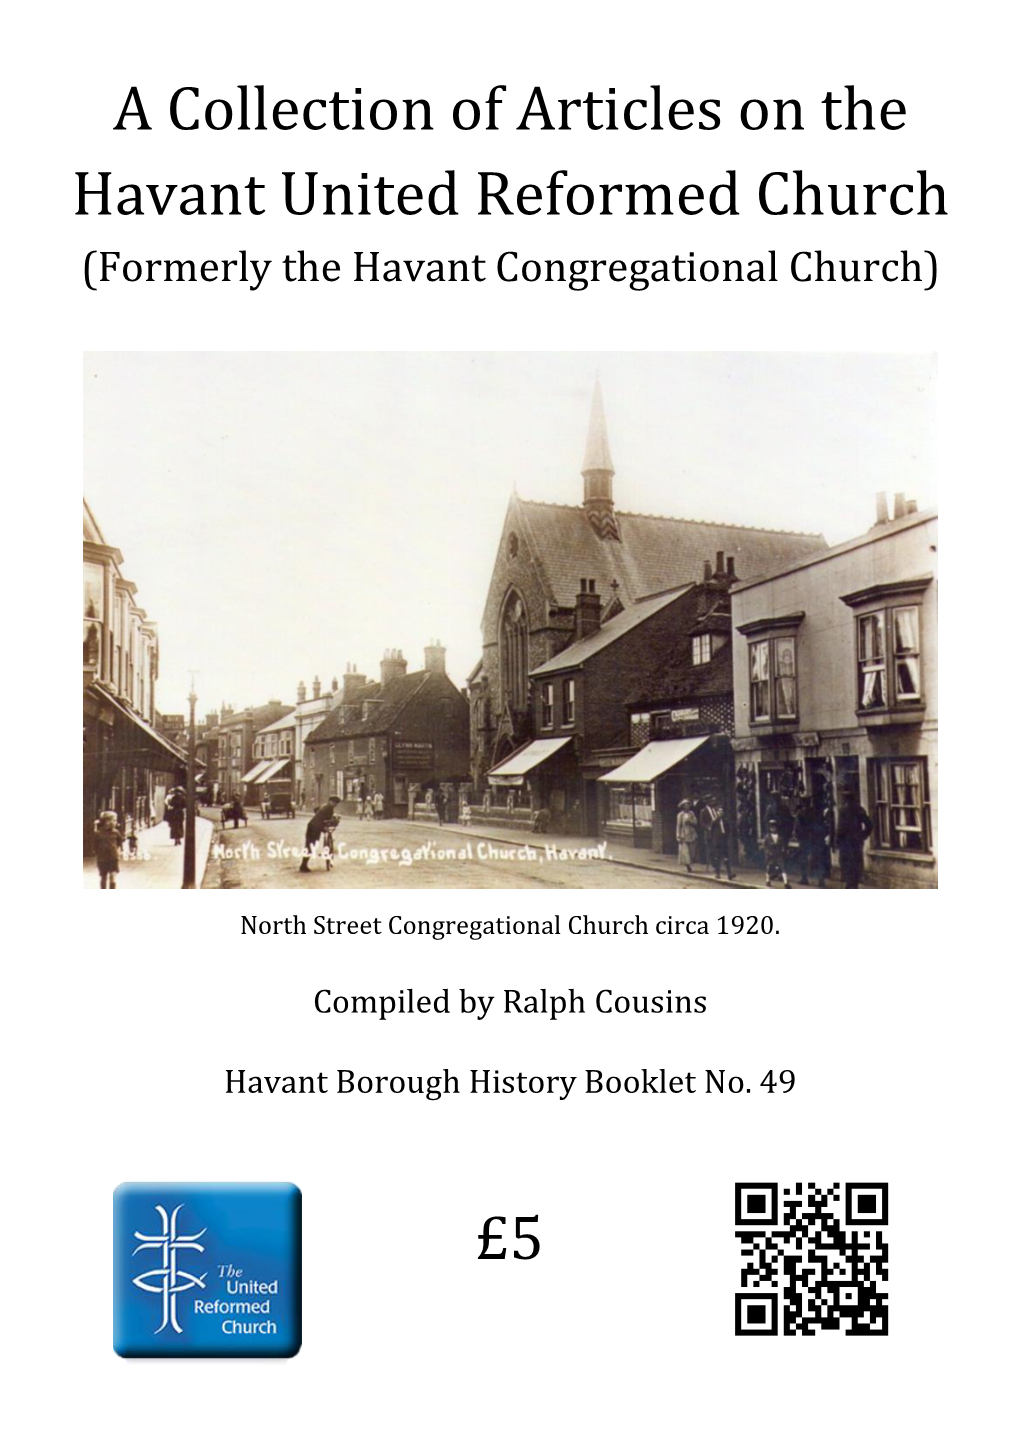 A Collection of Articles on the Havant Reformed Church